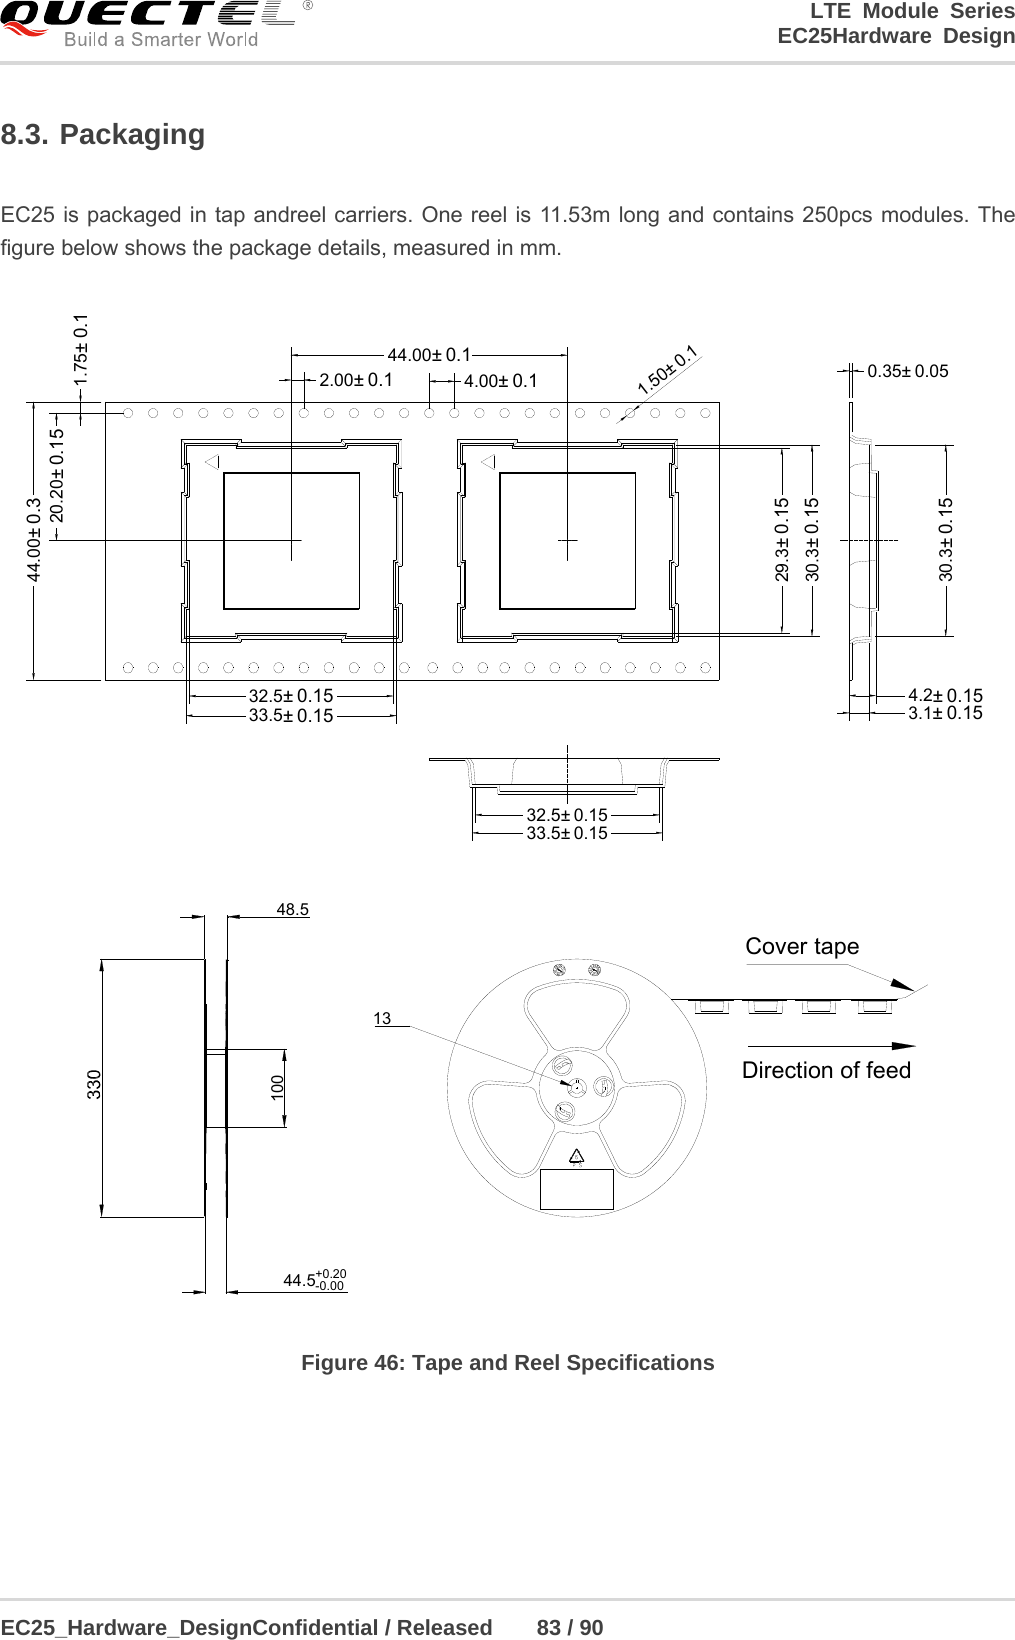 LTE Module Series                                                  EC25Hardware Design  EC25_Hardware_DesignConfidential / Released    83 / 90    8.3. Packaging  EC25 is packaged in tap andreel carriers. One reel is 11.53m long and contains 250pcs modules. The figure below shows the package details, measured in mm. 30.3±0.1529.3±0.1530.3±0.1532.5±0.1533.5±0.150.35± 0.054.2±0.153.1±0.1532.5± 0.1533.5± 0.154.00±0.12.00±0.11.75±0.120.20±0.1544.00±0.344.00±0.11.50±0.1 1310044.5+0.20-0.0048.5 Figure 46: Tape and Reel Specifications  